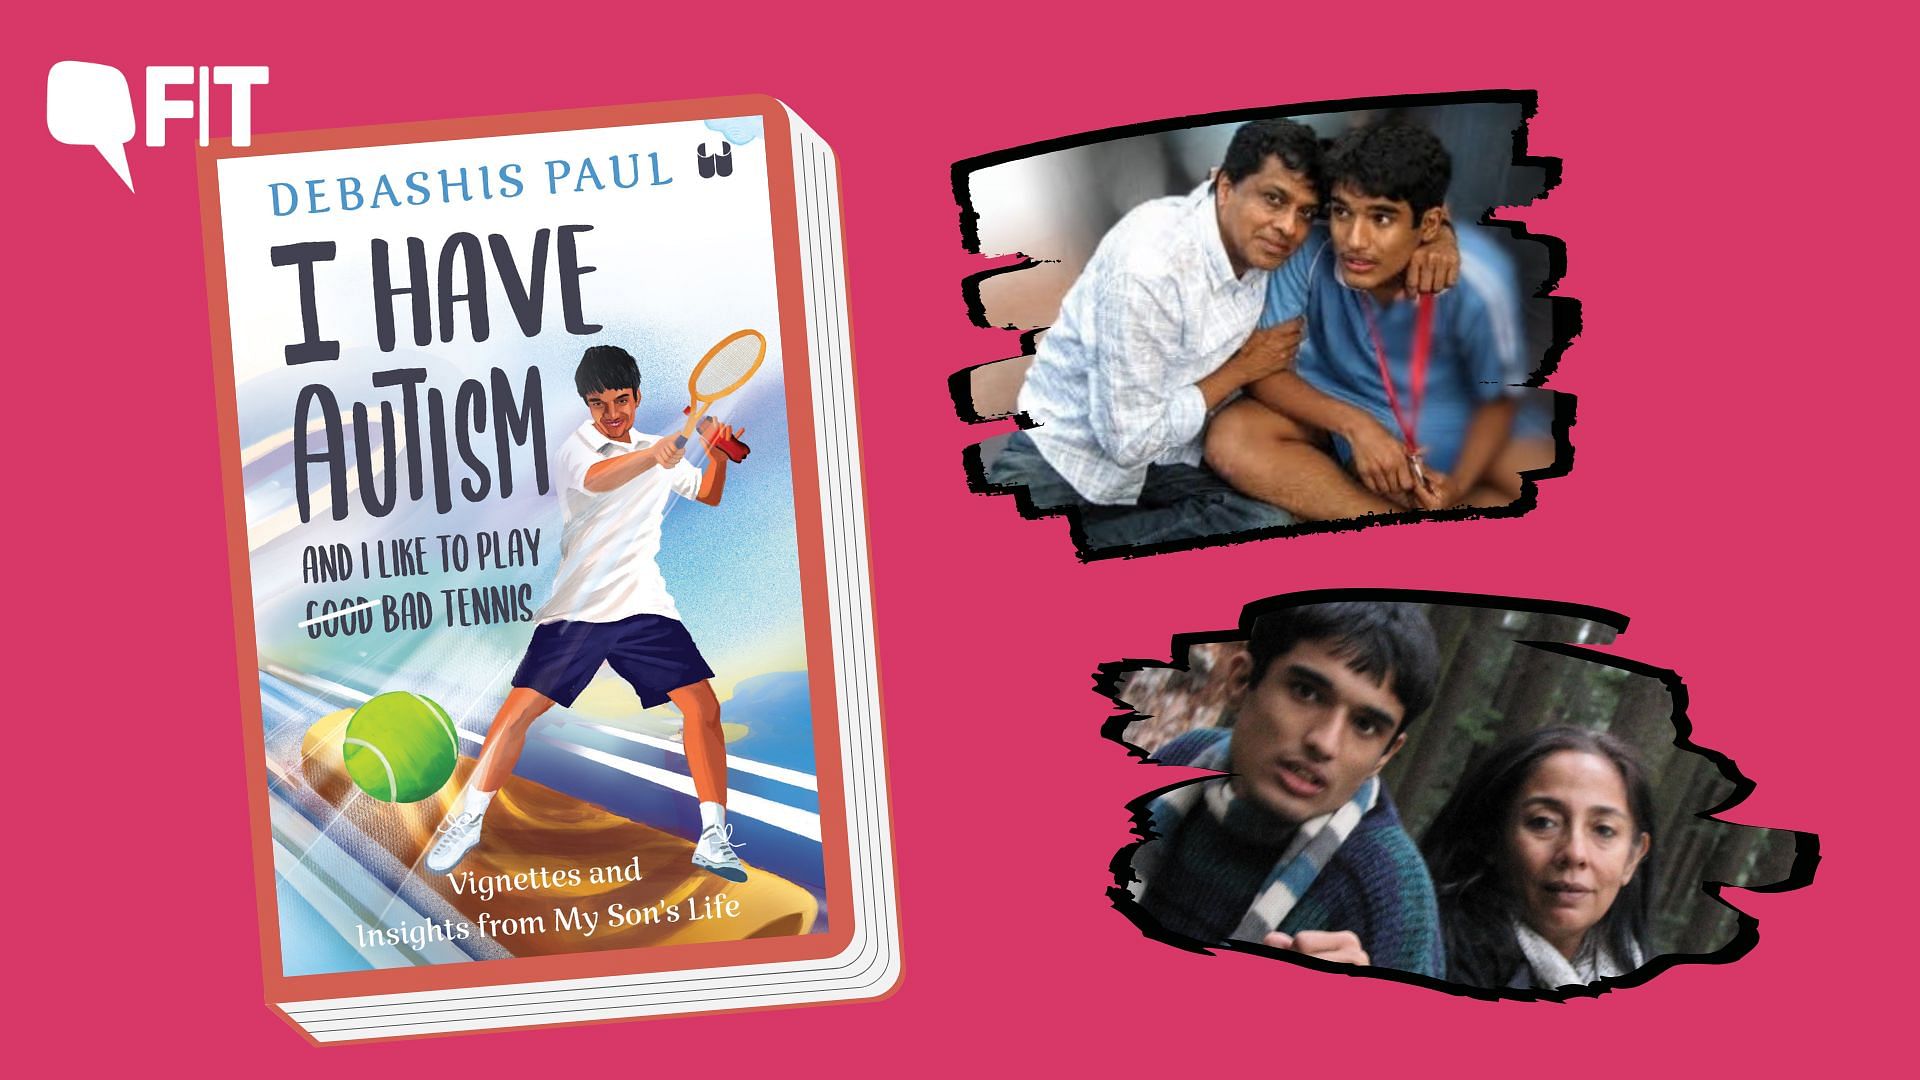 <div class="paragraphs"><p><em>'I Have Autism And I Like To Play G̶o̶o̶d̶ Bad Tennis', is Debashis Paul's latest book, released on 17 April.</em></p></div>